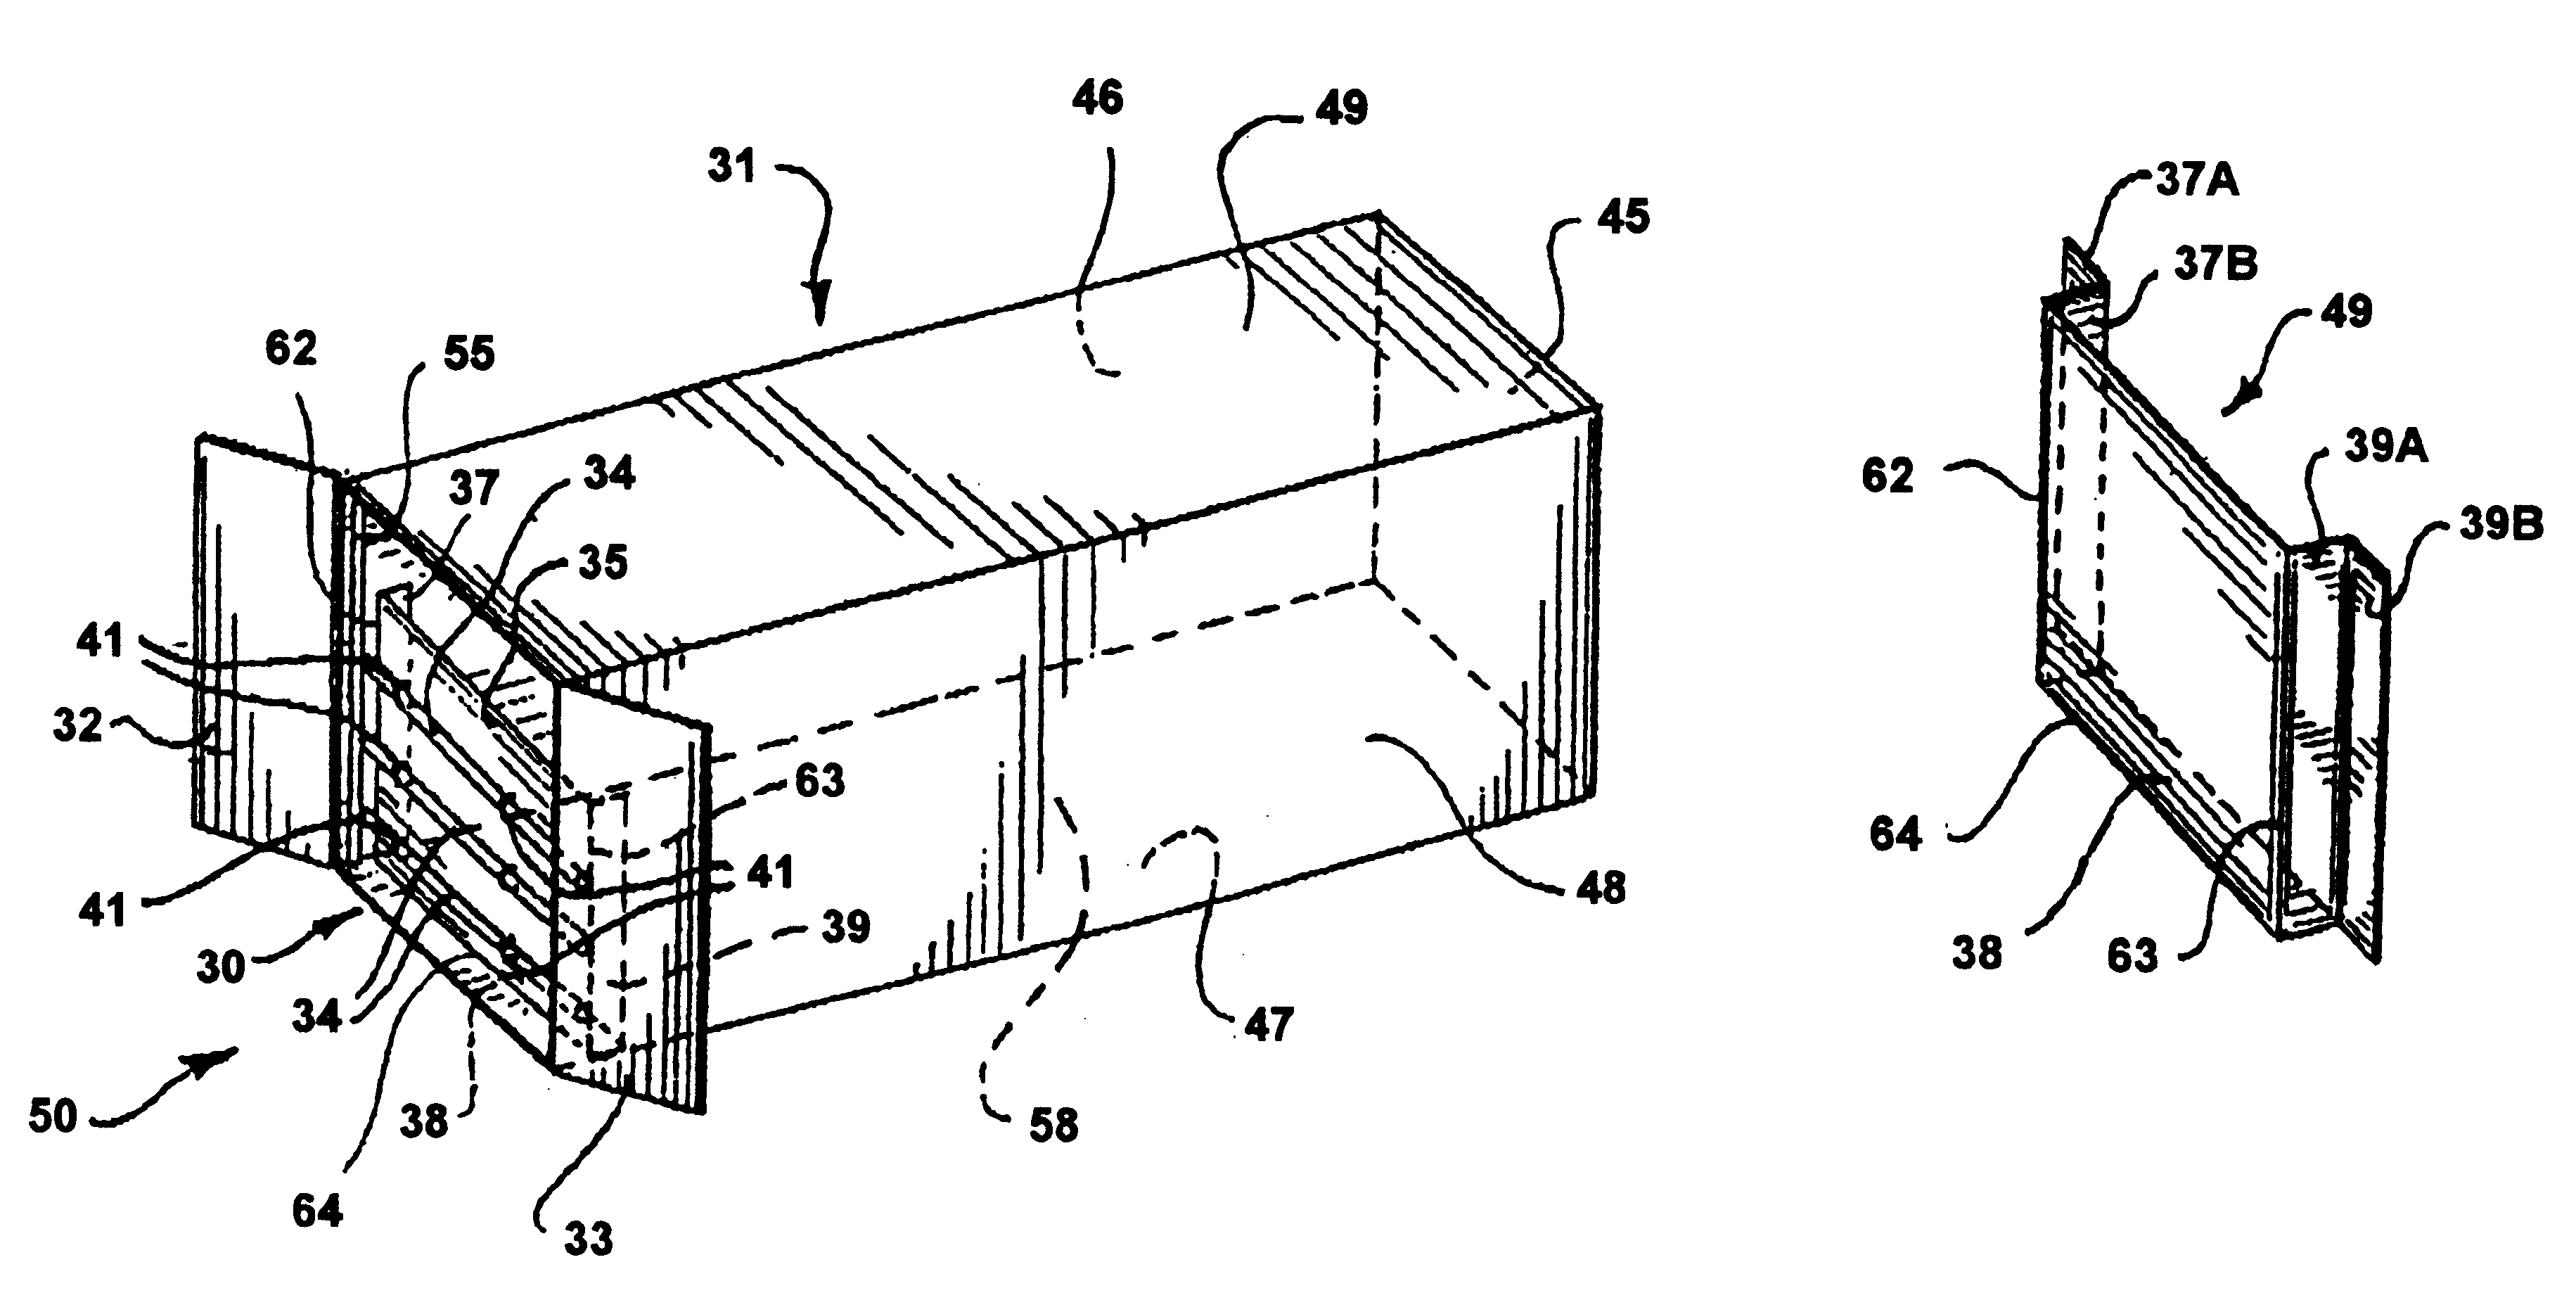 Bulkhead for retaining a cargo in a container